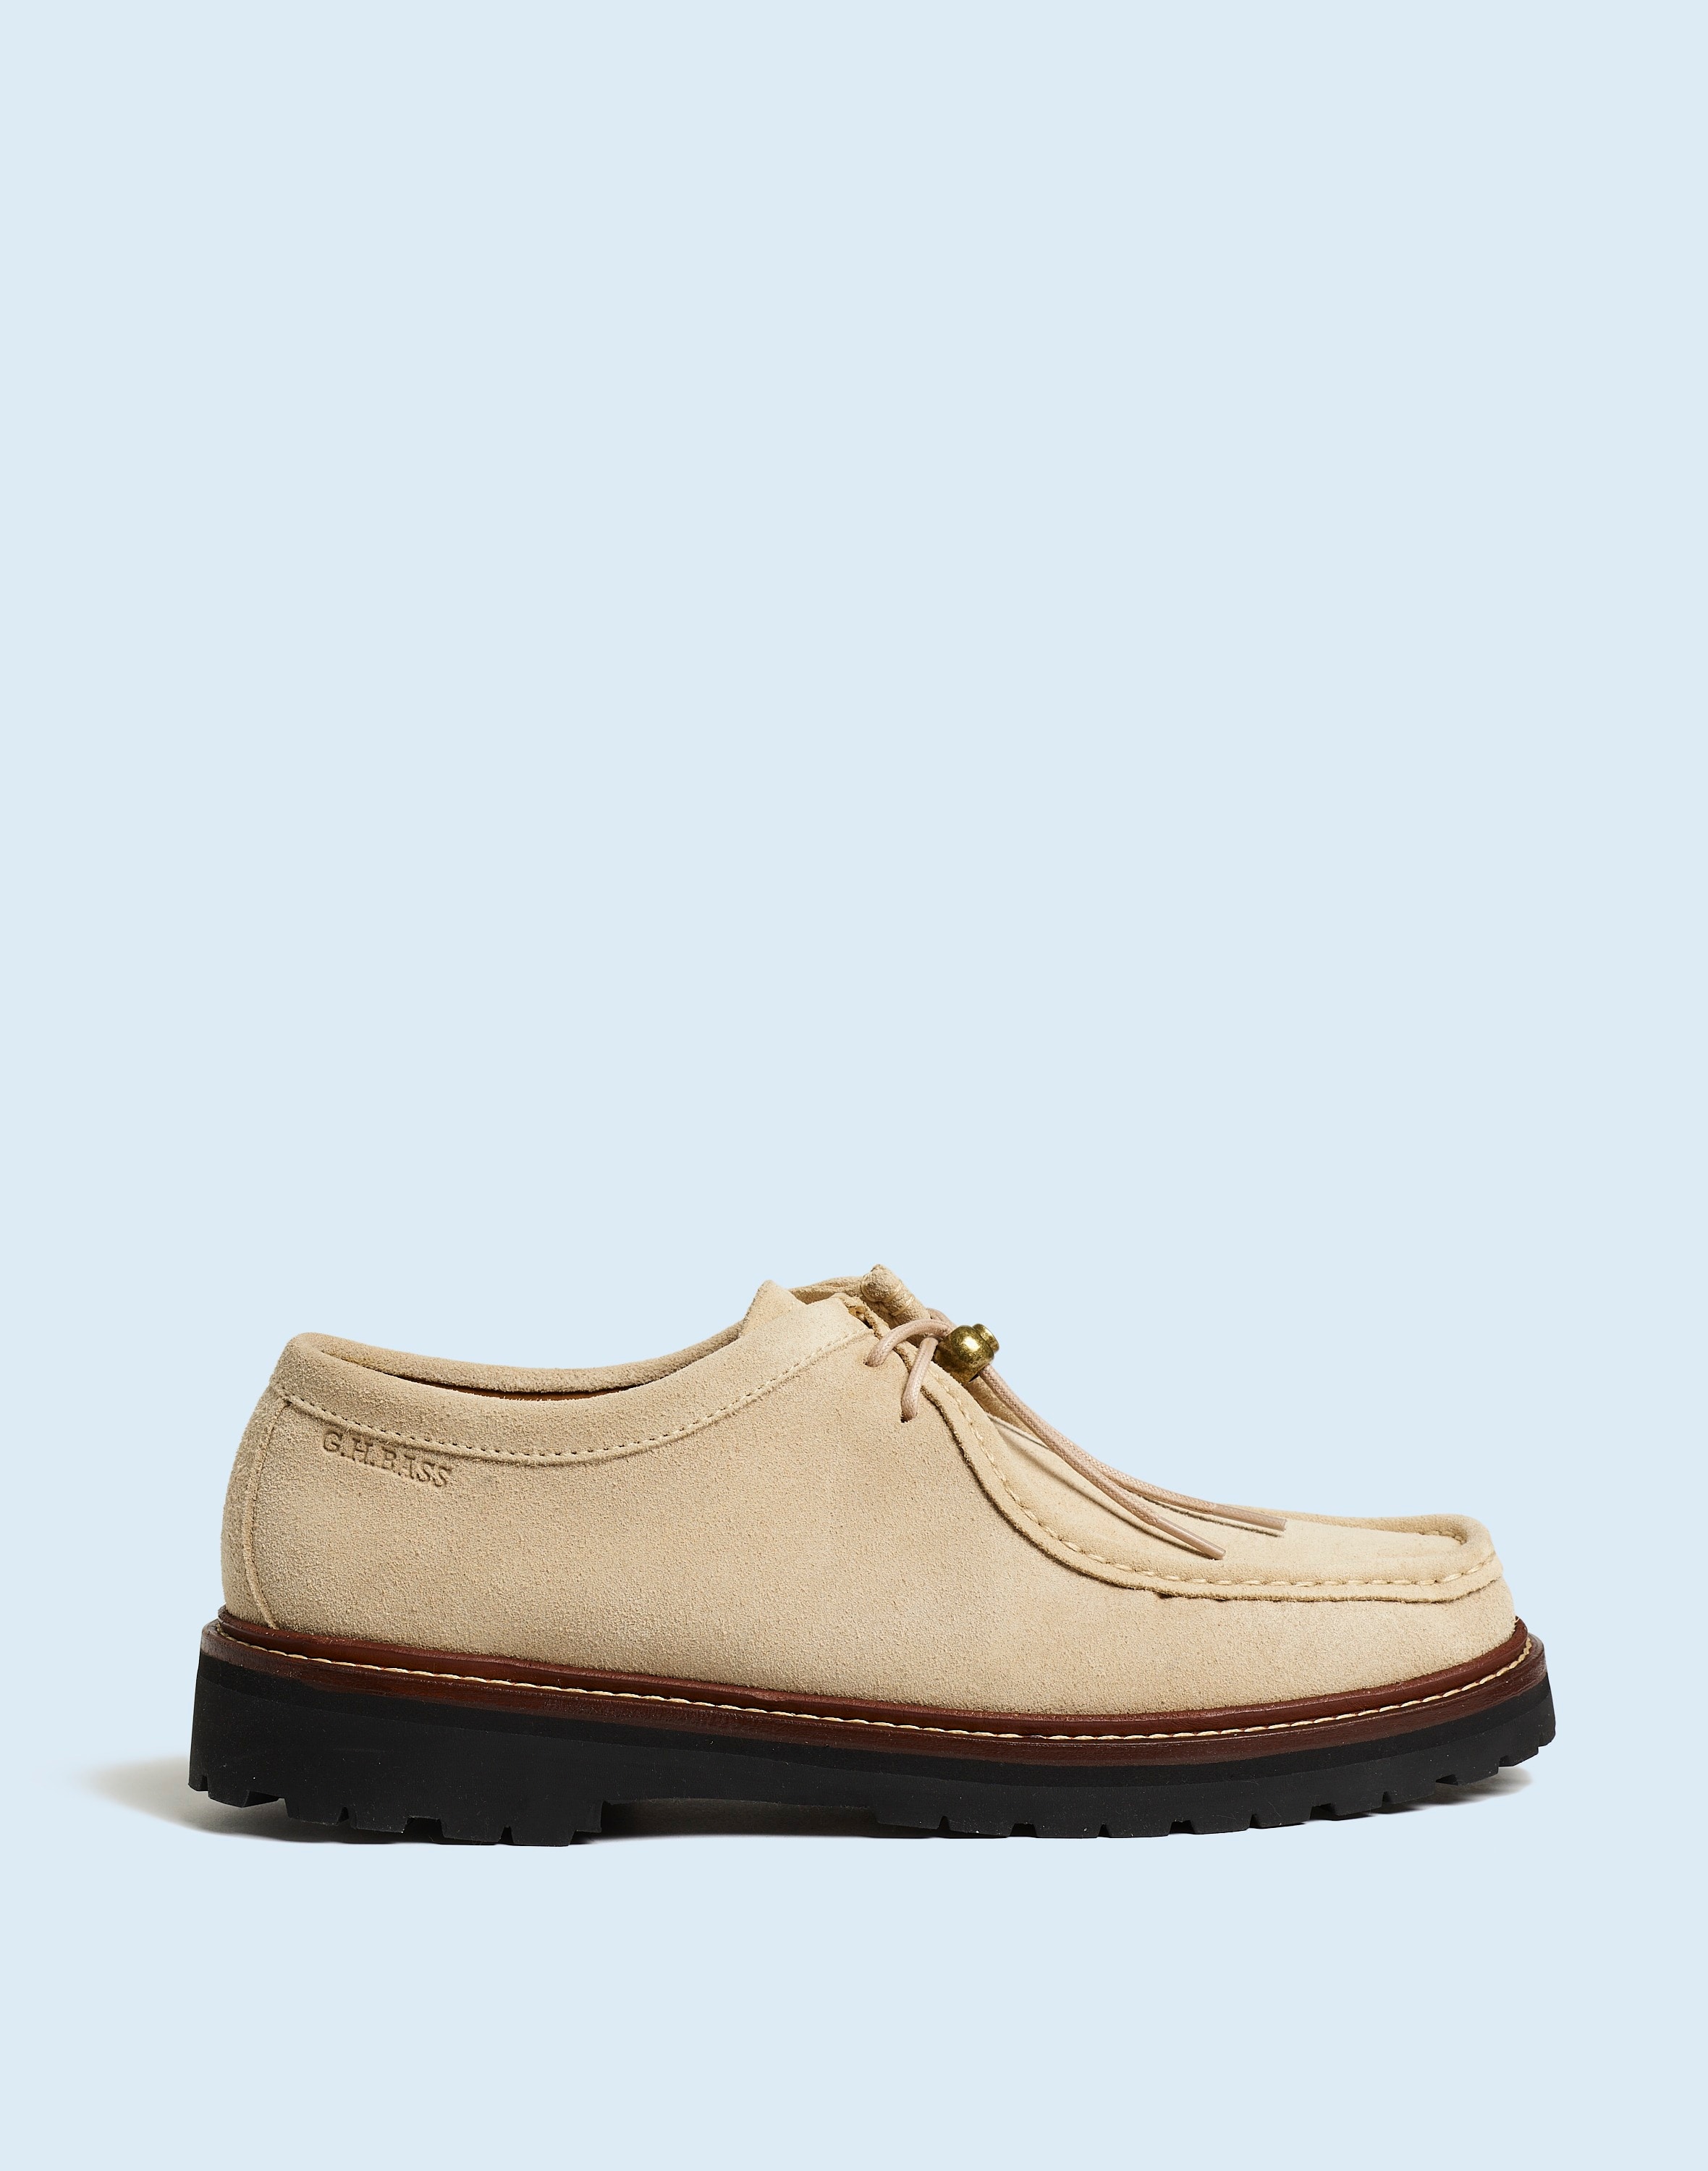 Madewell x G.H.BASS Wallace Suede Moc